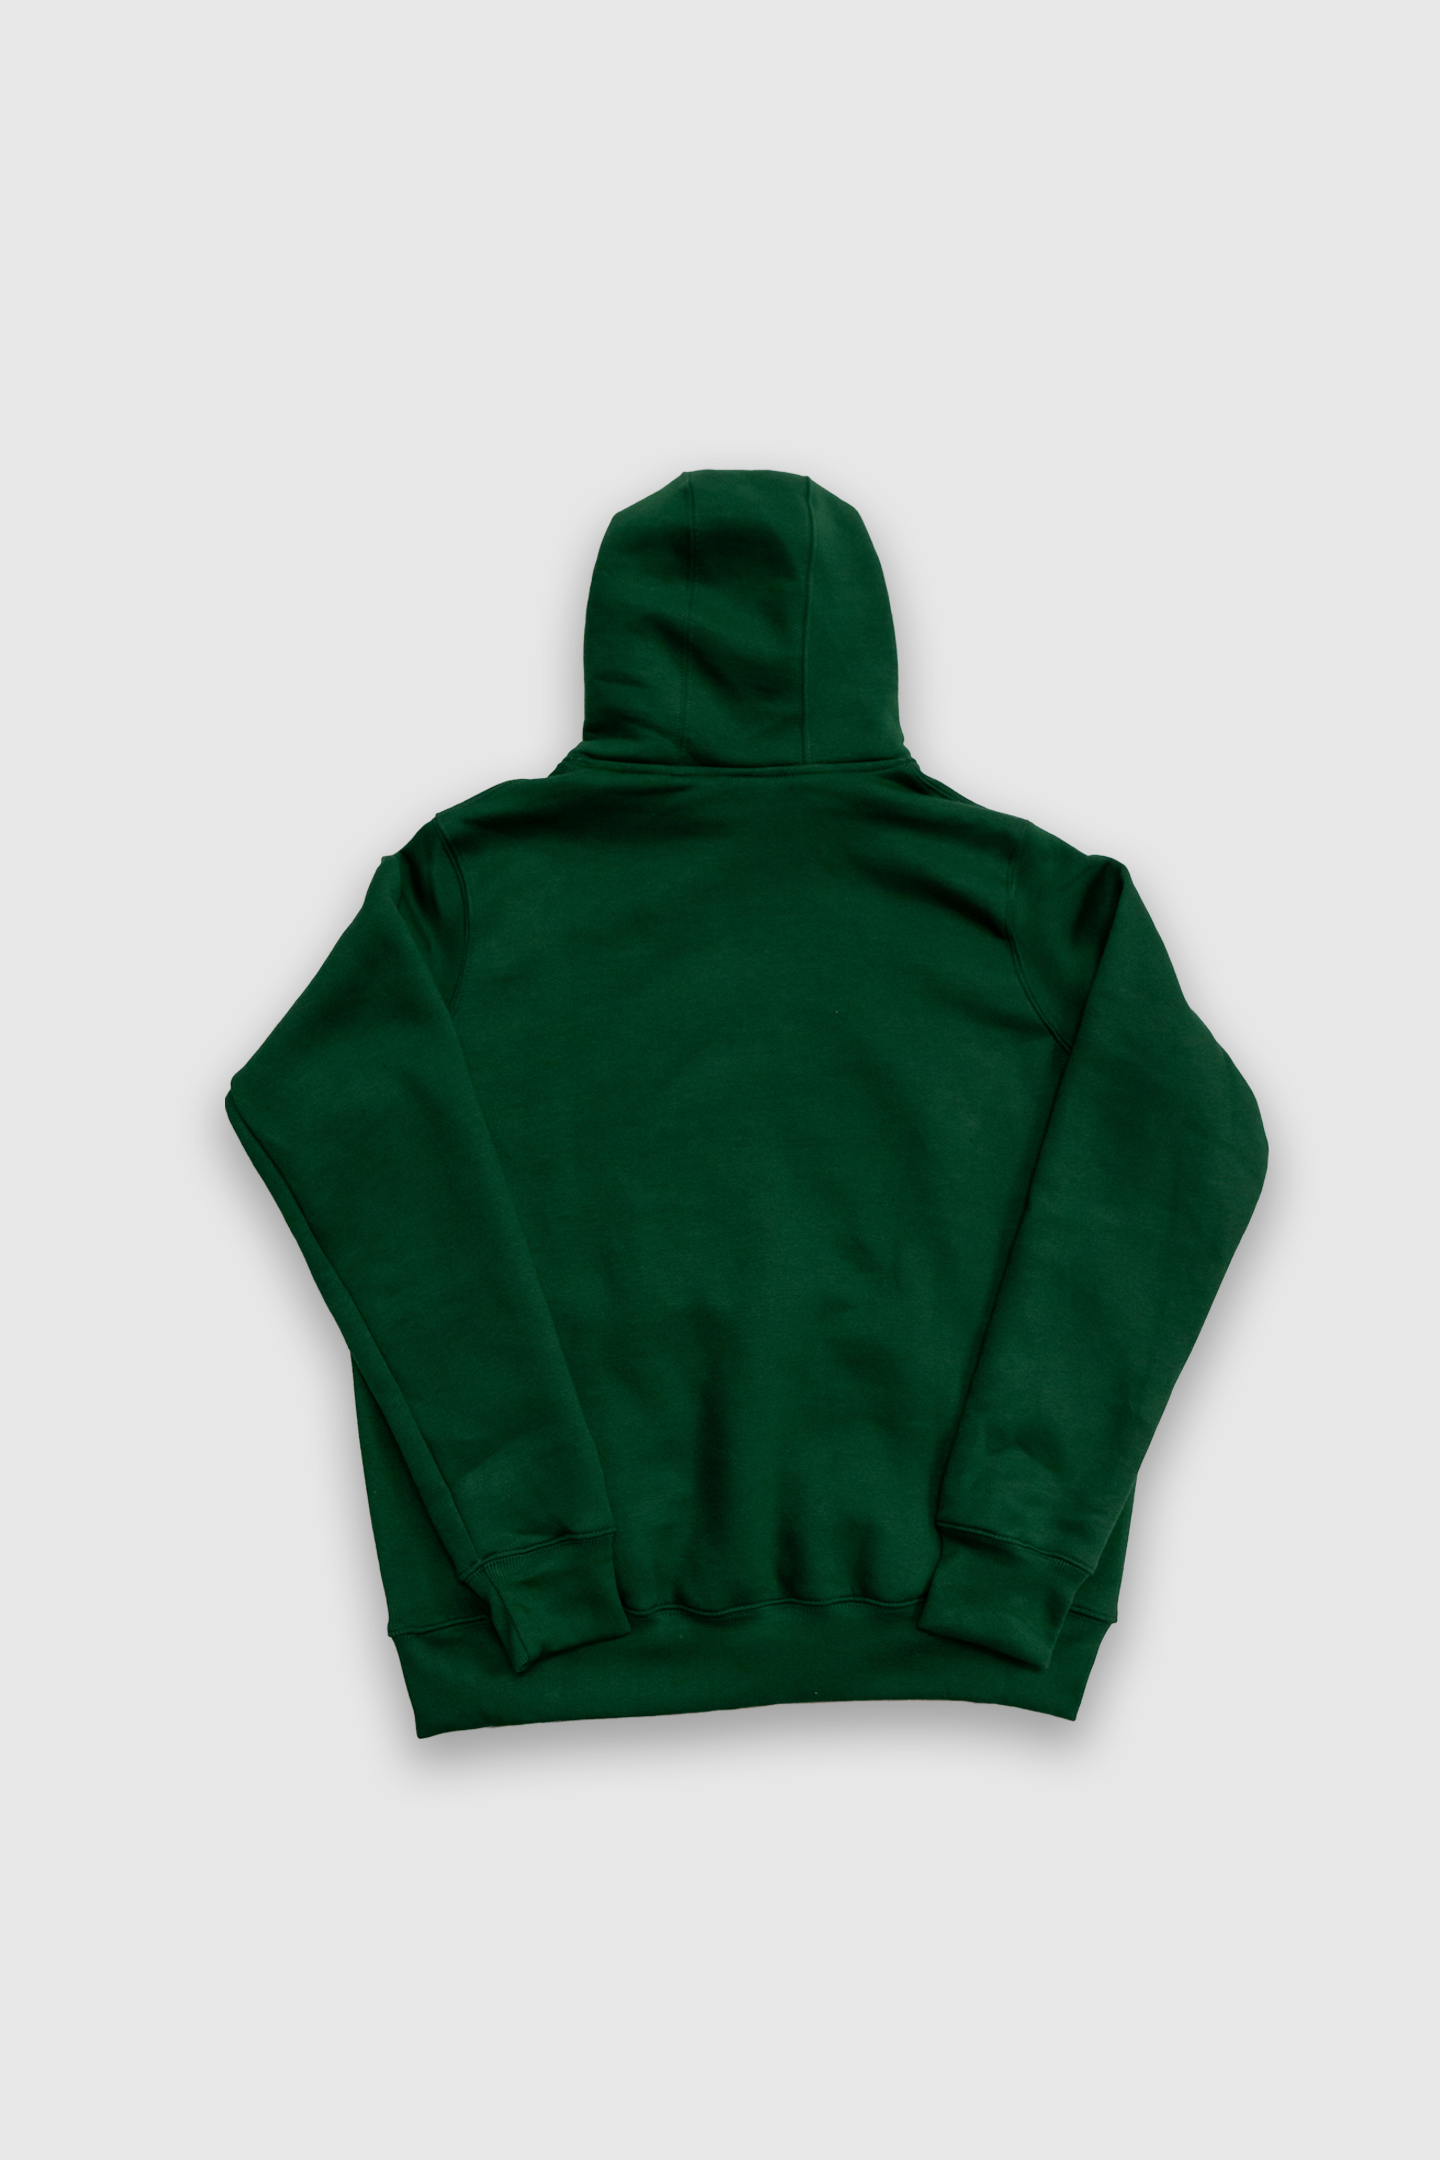 Bproud "Forest Green" Pullover Hoodie